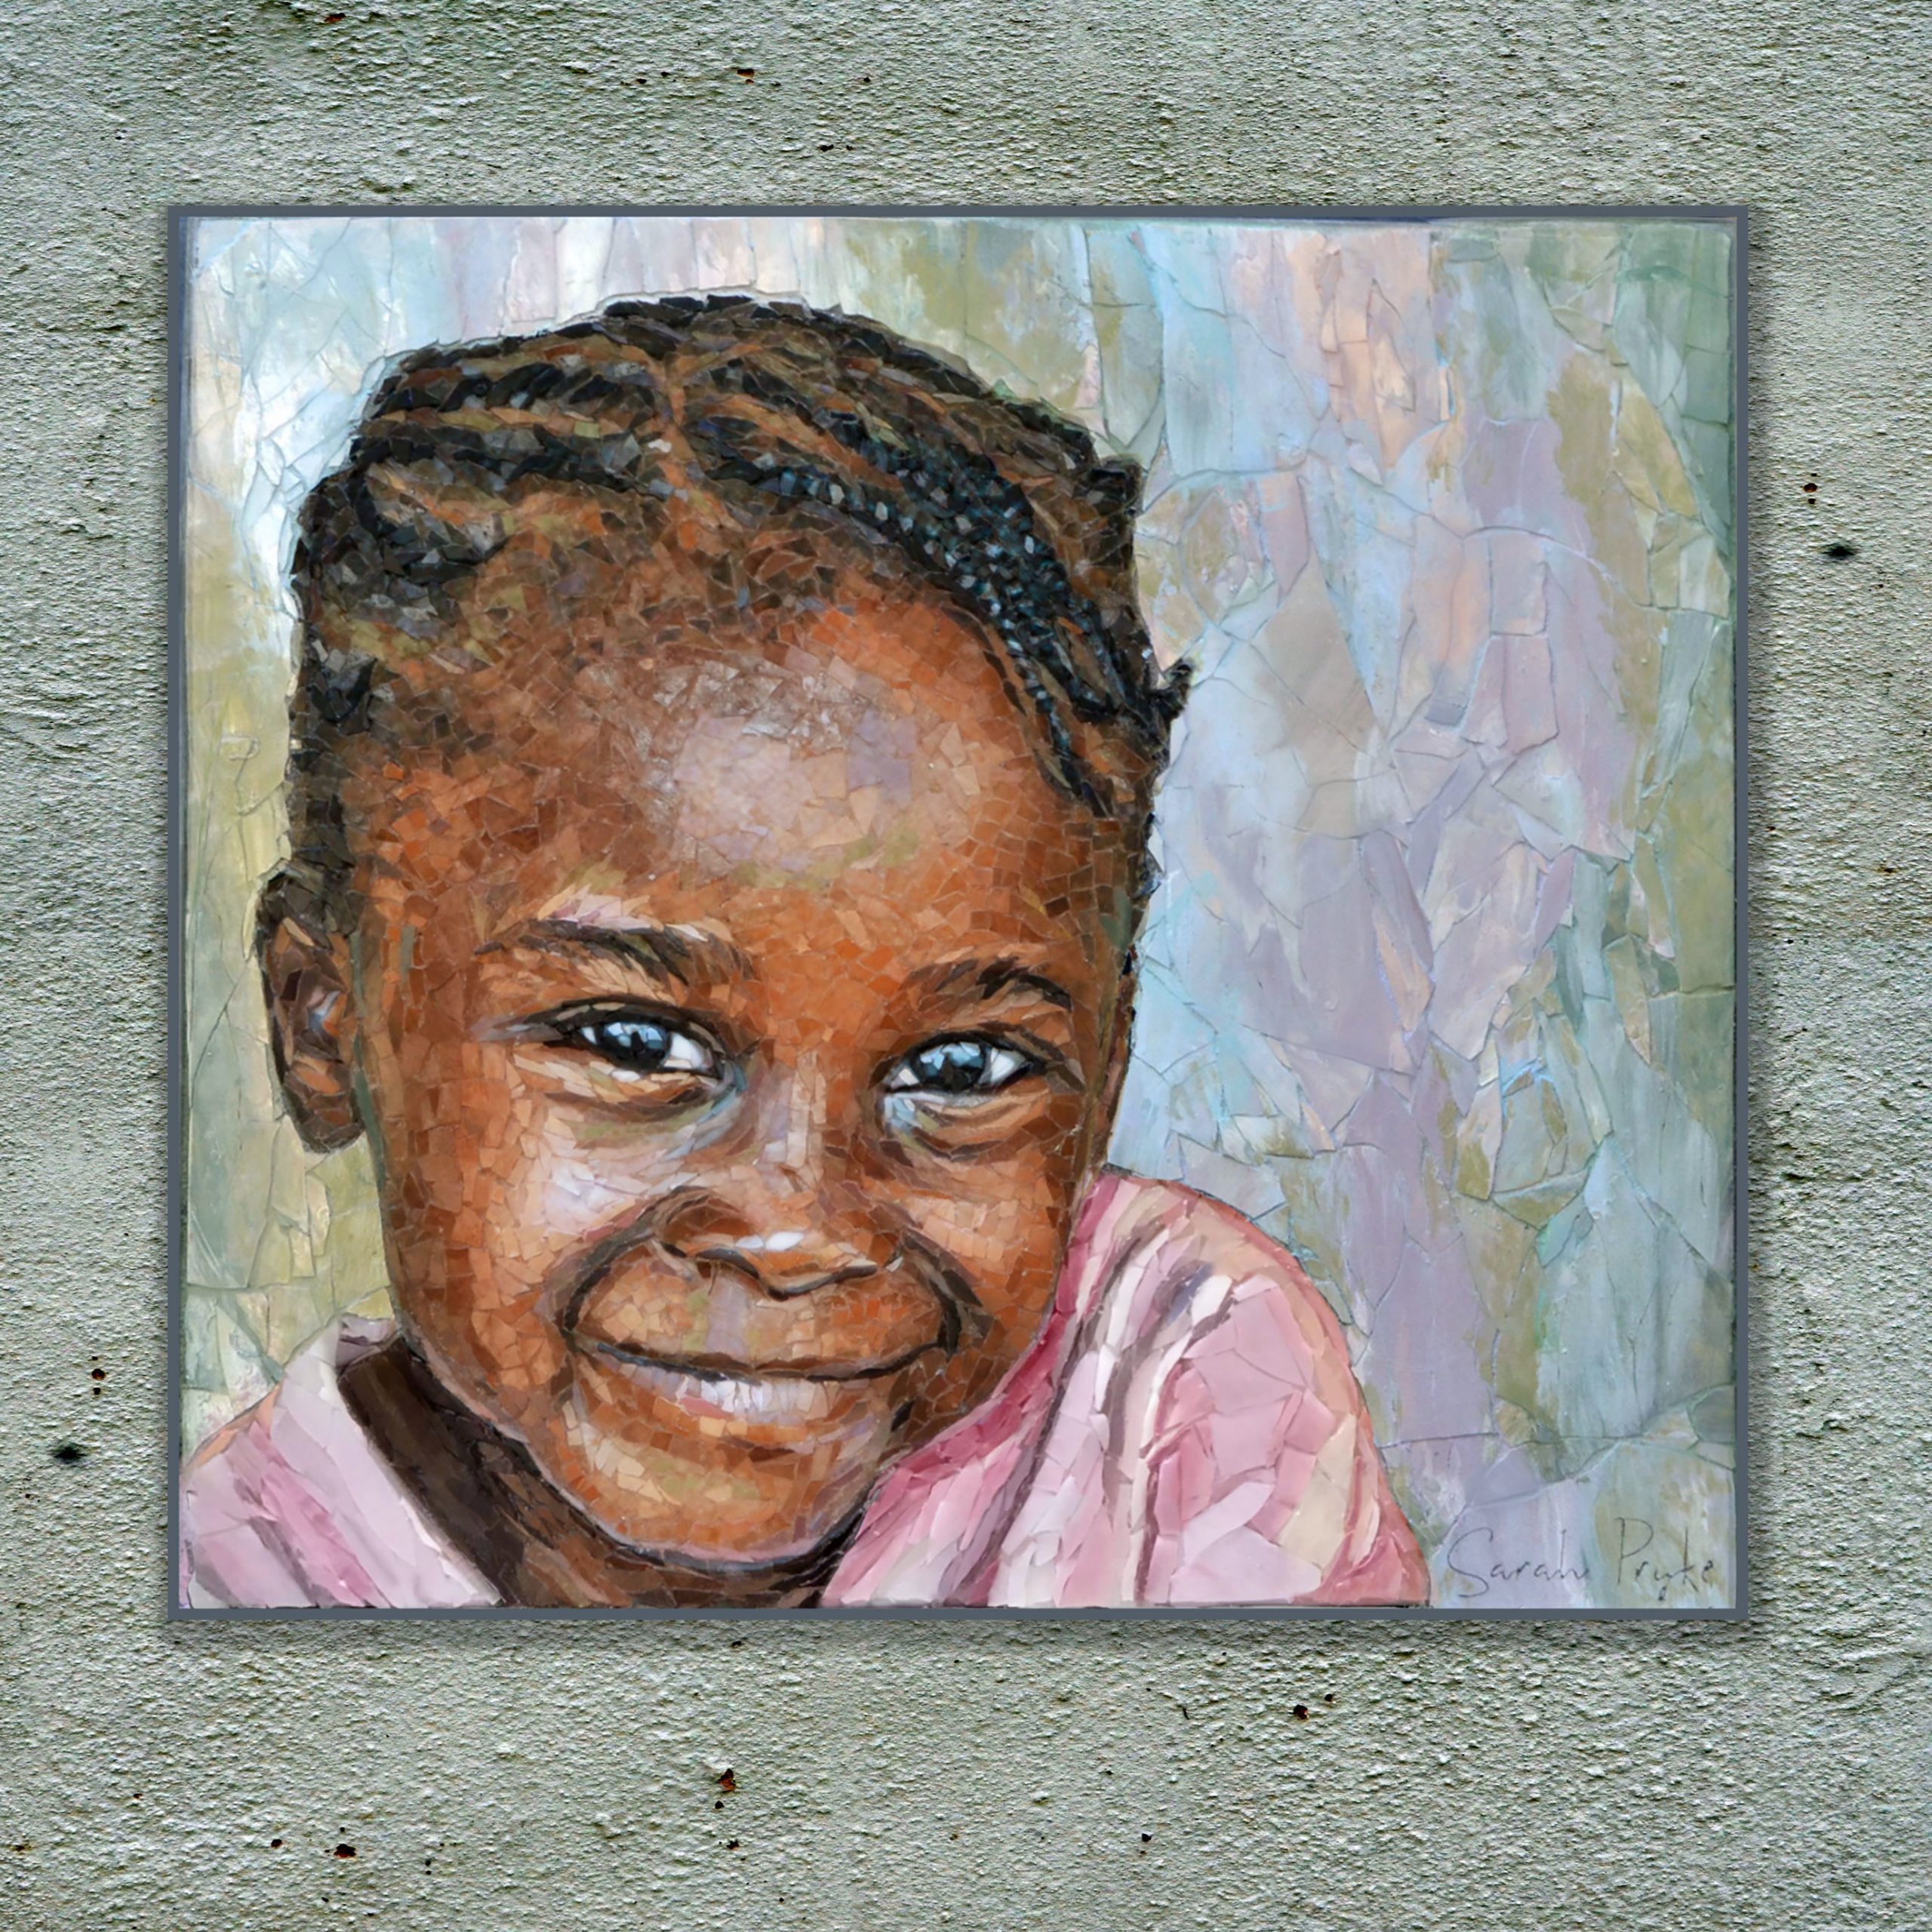 Title: “Thandeka”<br/> 
Size: 25x28 cm<br/>
Price: SOLD (South Africa)<br/>
Inspiration: Thandeka is a happy and sweet little girl, who is a bit shy... and also just a little bit cheeky! I've tried to capture the light, and her beautiful, bubbly spirit and infectious smile, in her dark eyes by including the big horizon/sky reflection (and my silhouette) as she smiled up at me while I took the photograph. 